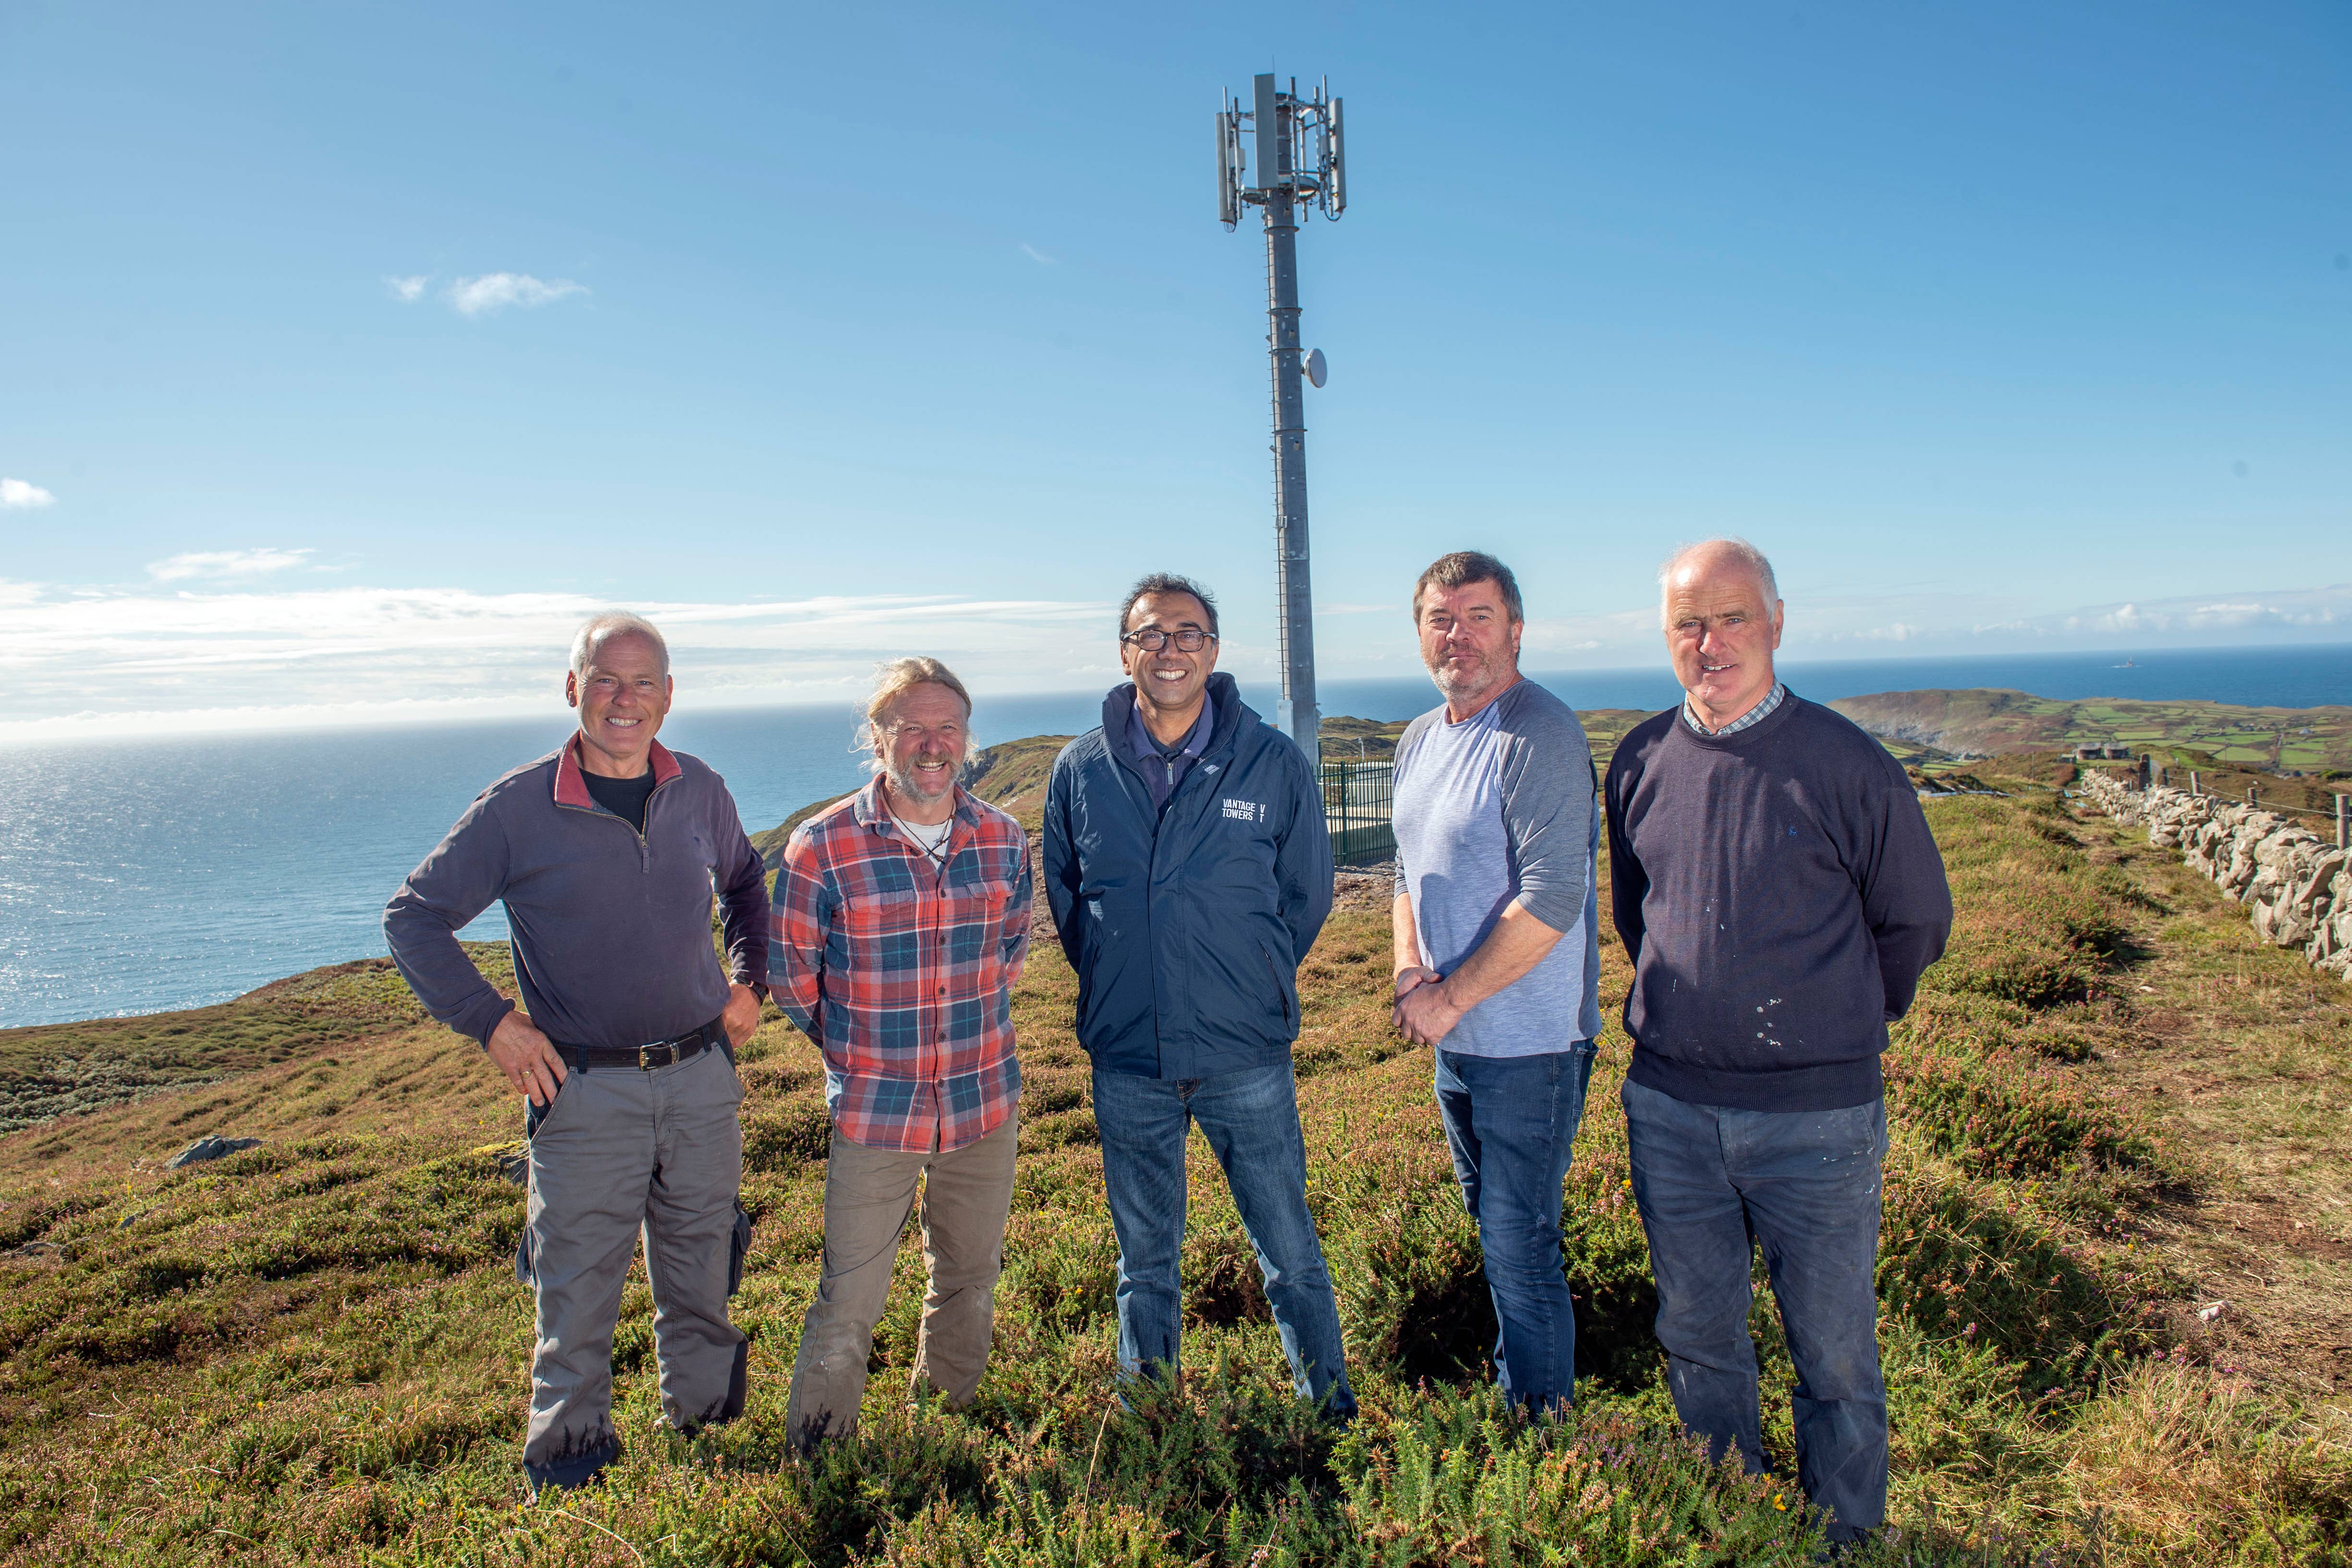 Full mobile and broadband connection secured on island after community effort The Independent